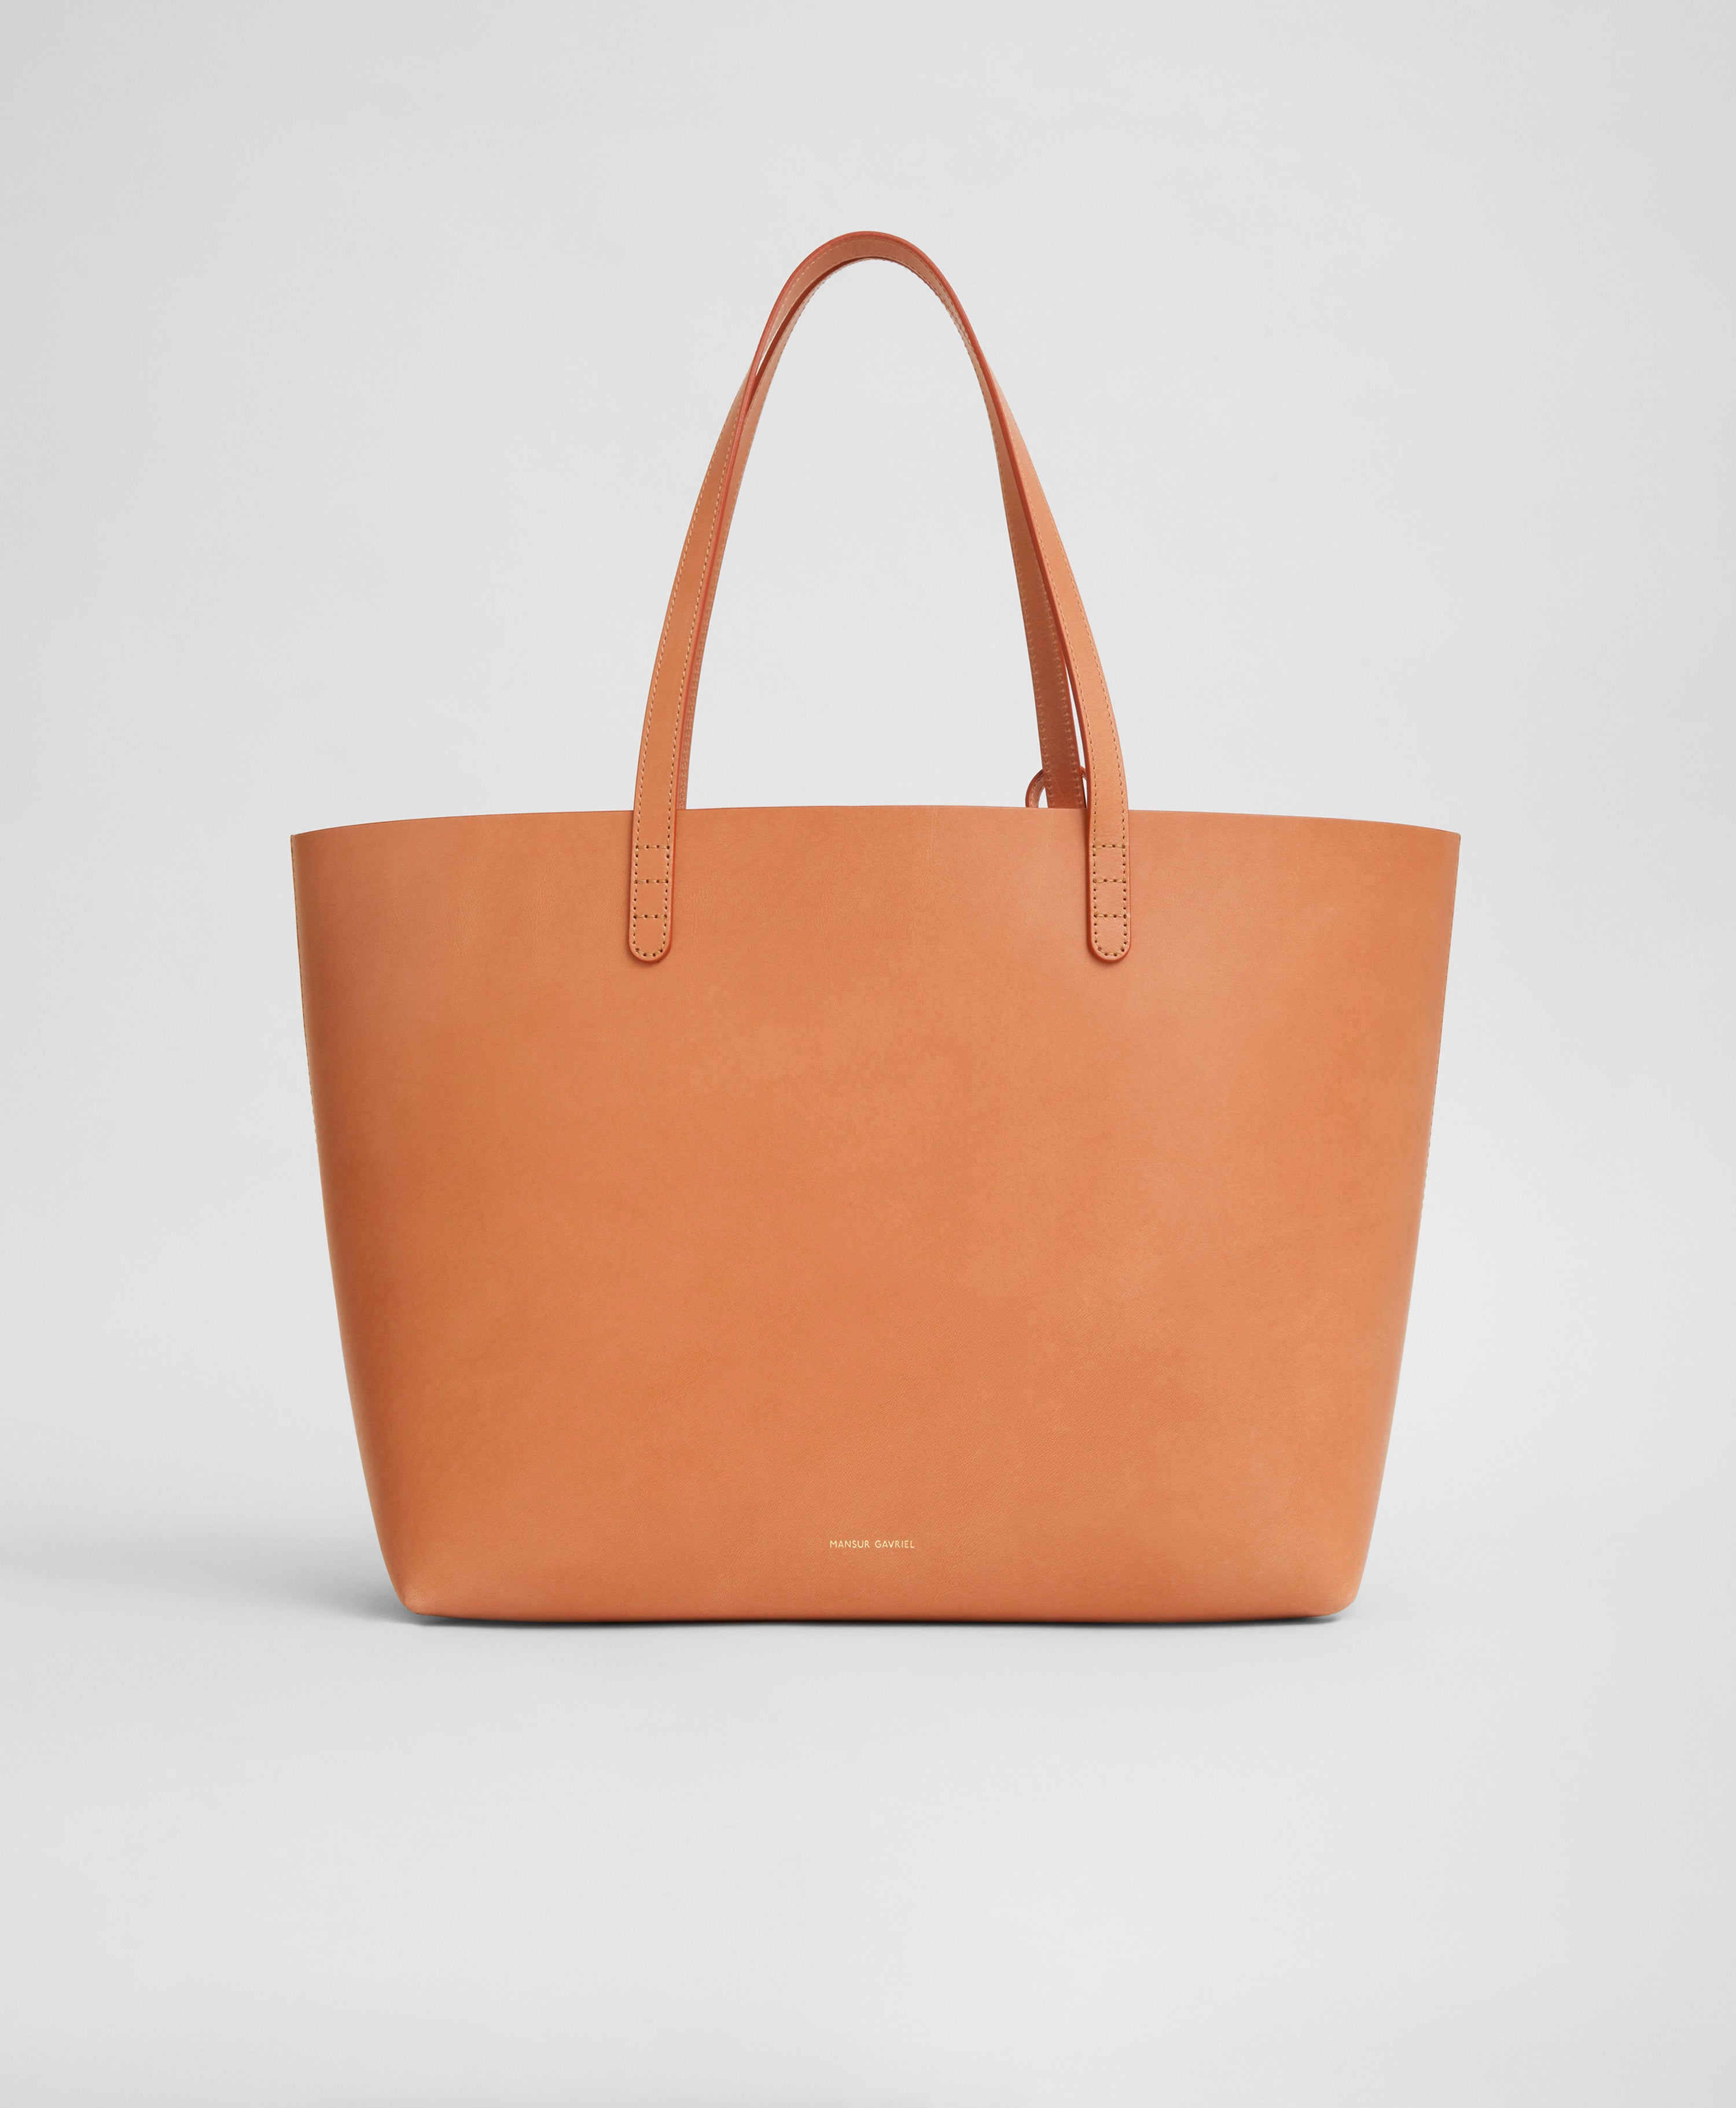 Shiny Love Tote Bag: Make a Bold Statement on every shopping trip